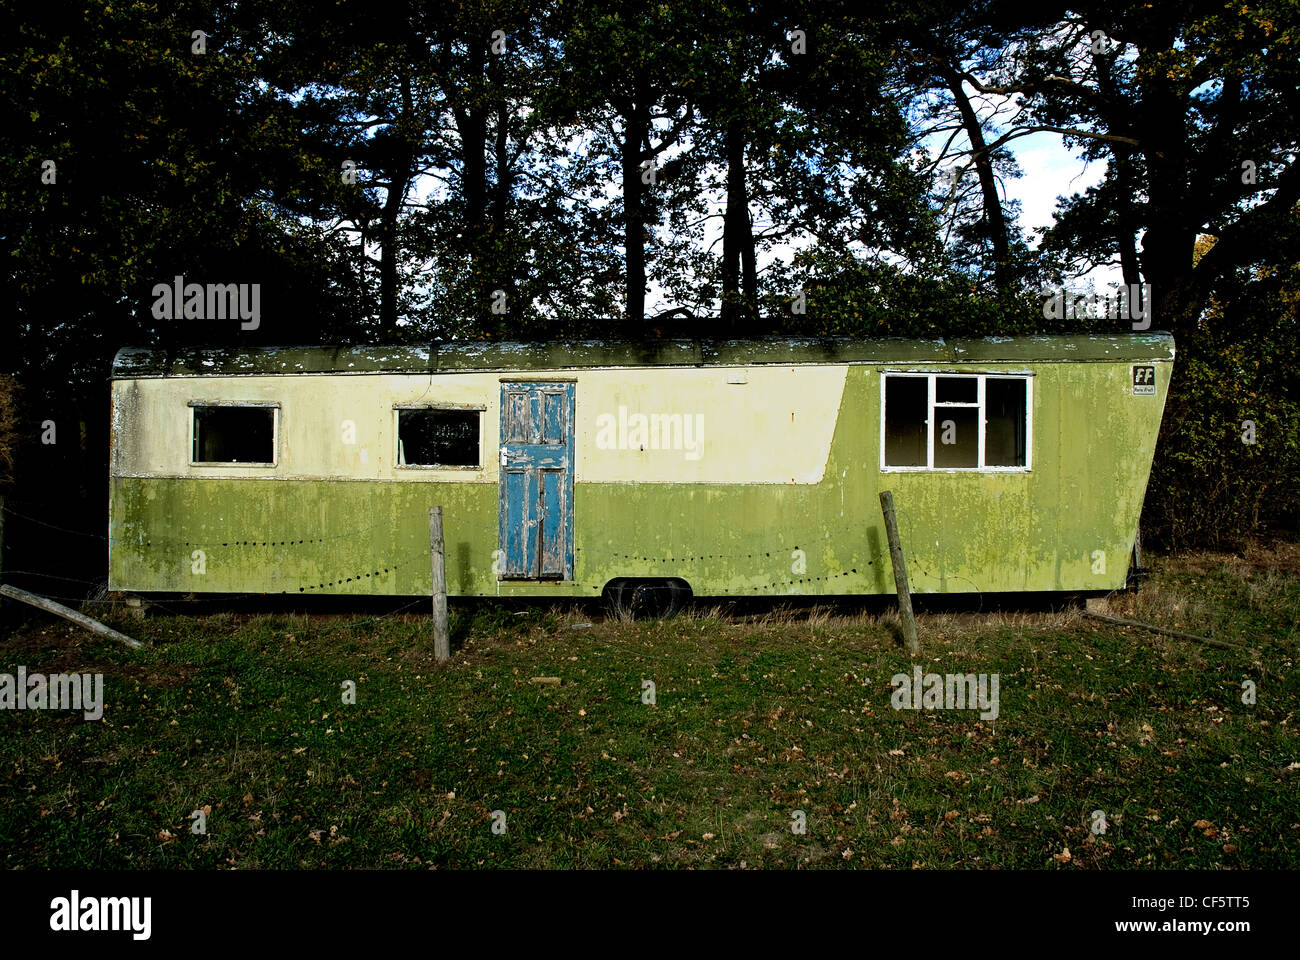 An old caravan, abandoned to the elements. Stock Photo